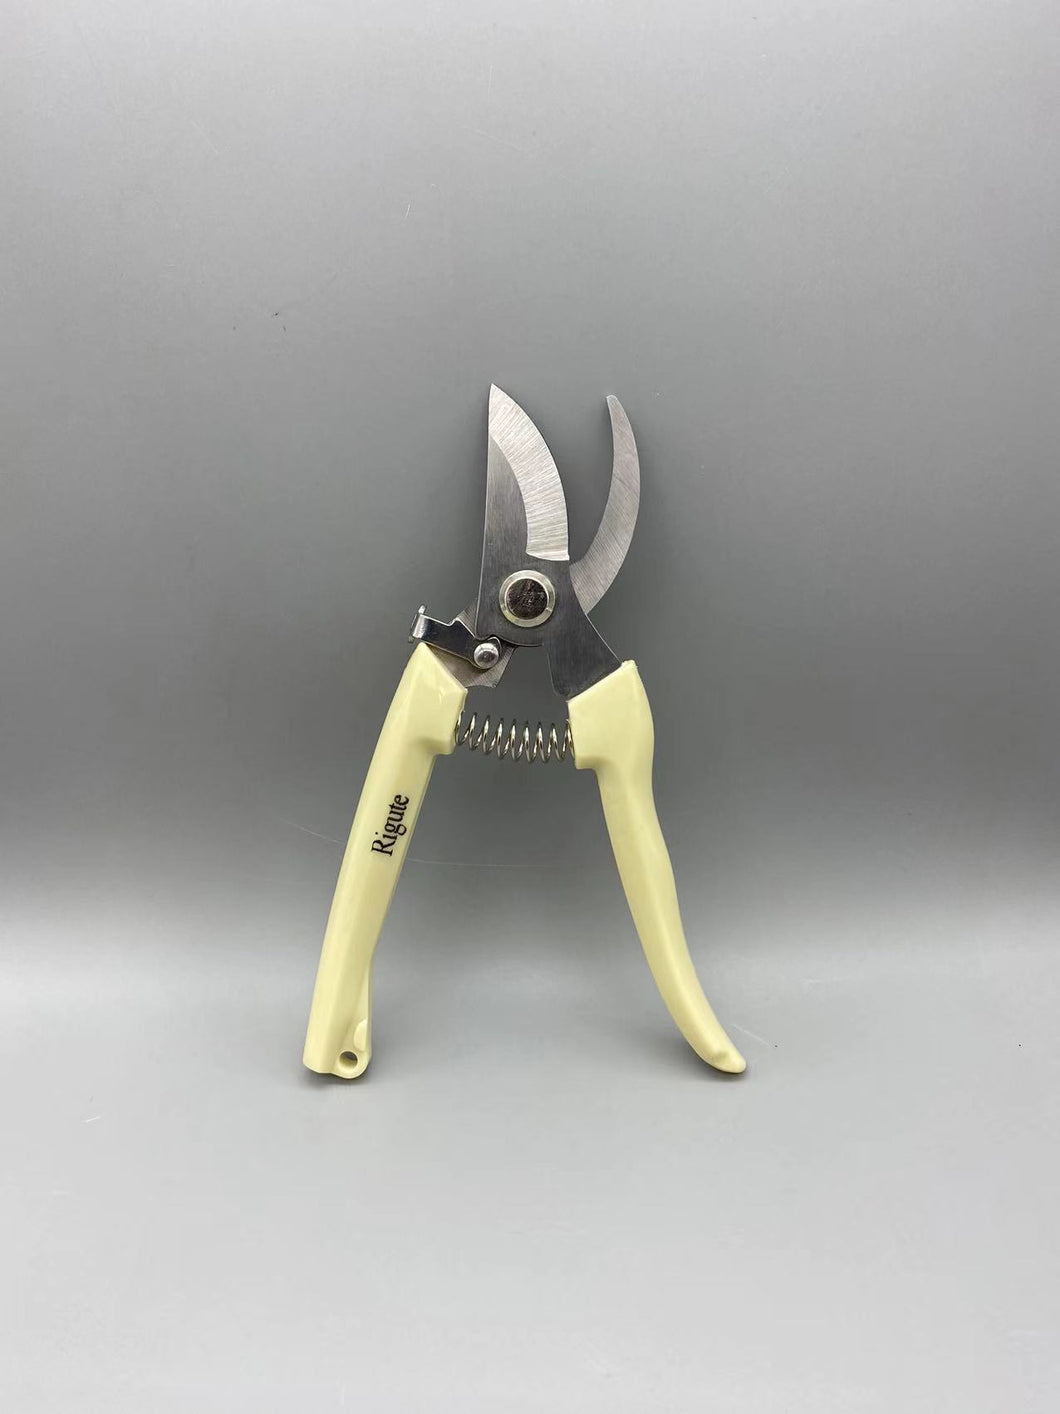 Rigute Gardening shears and scissors,Gardening Tools,Bypass Pruning Shears, Sharp Precision-ground Steel Blade, 5.5” Plant Clippers.